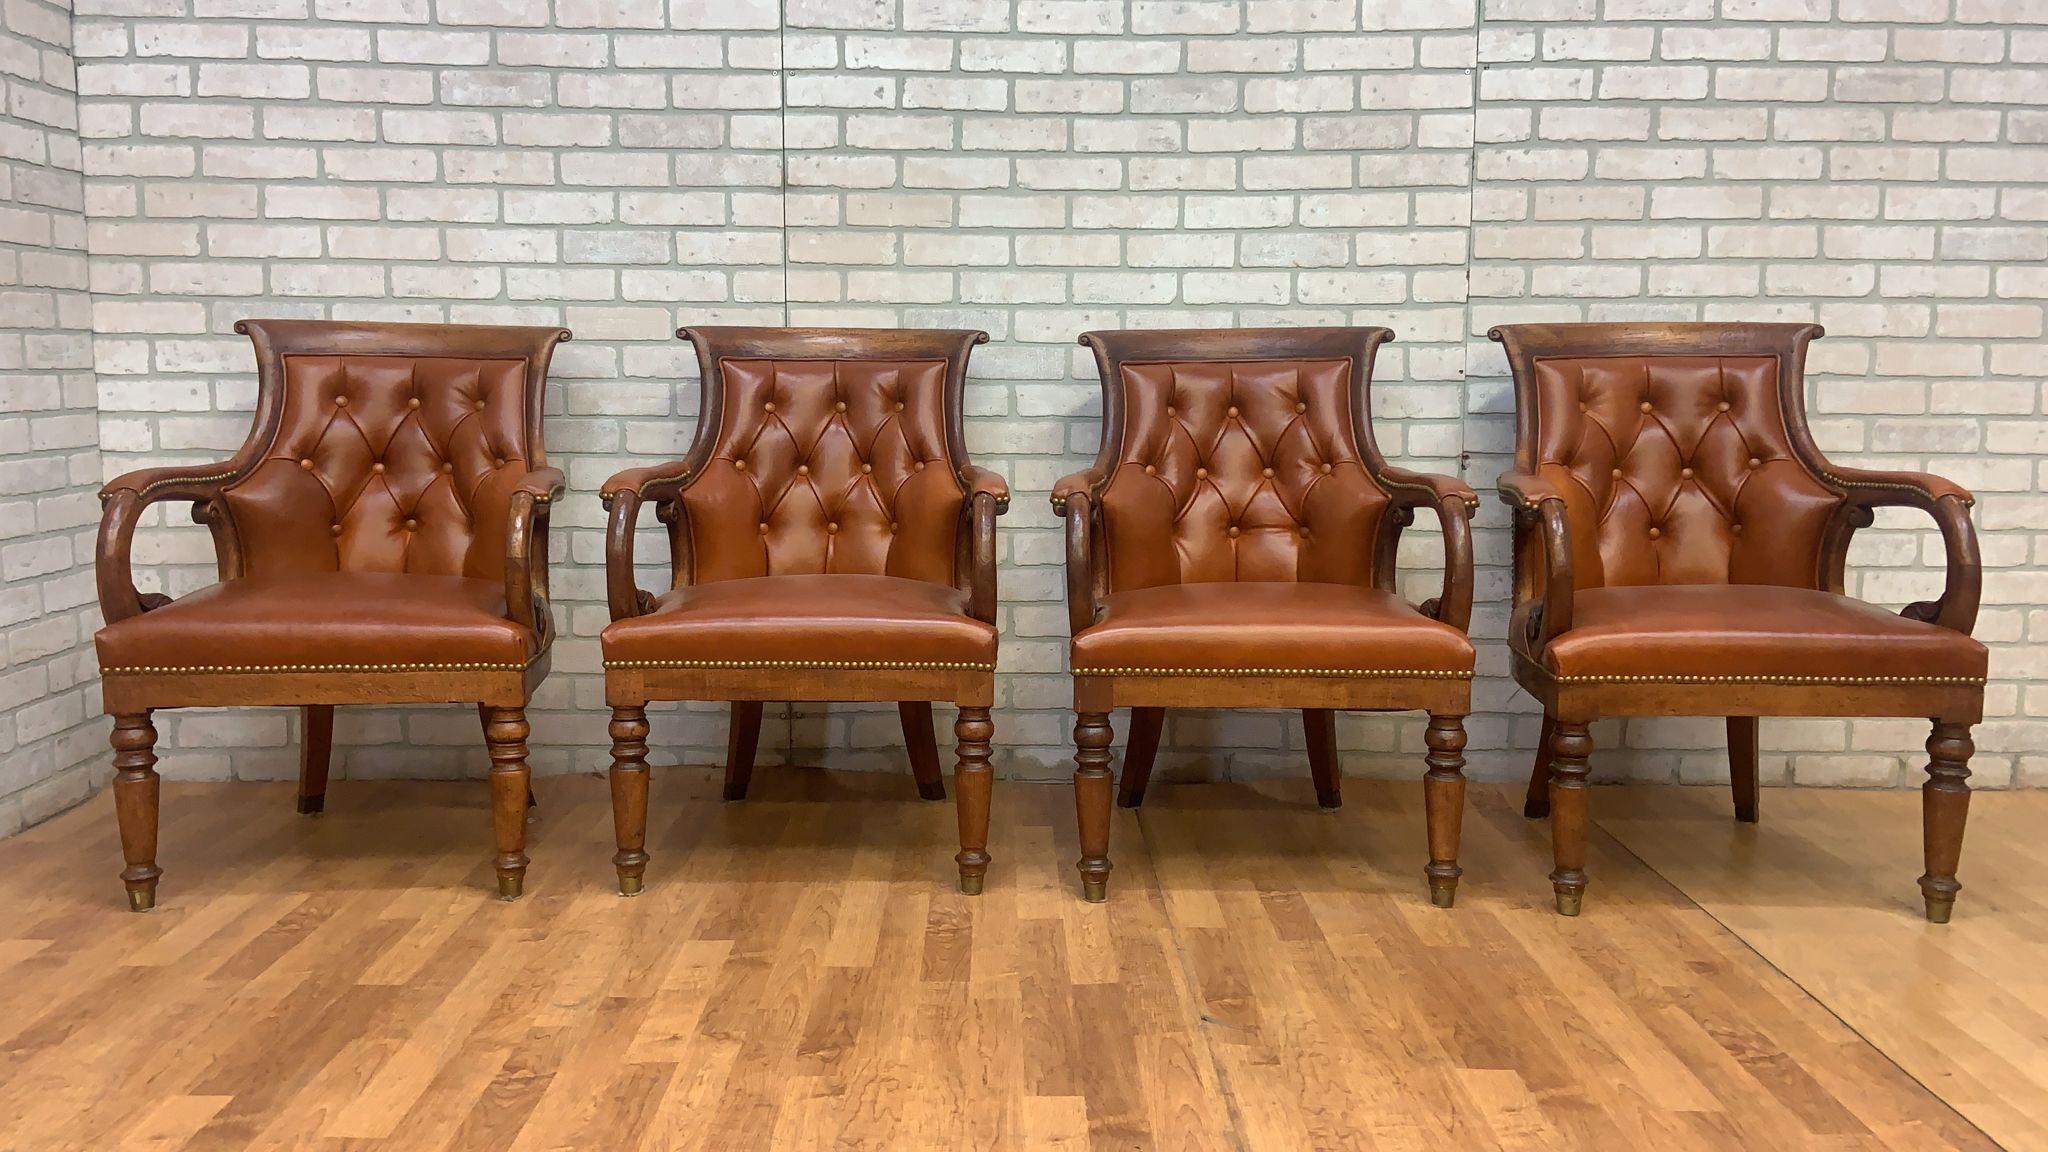 Art Nouveau Vintage Hancock and Moore Tufted Jockey Club Chair Newly Upholstered - Set of 4